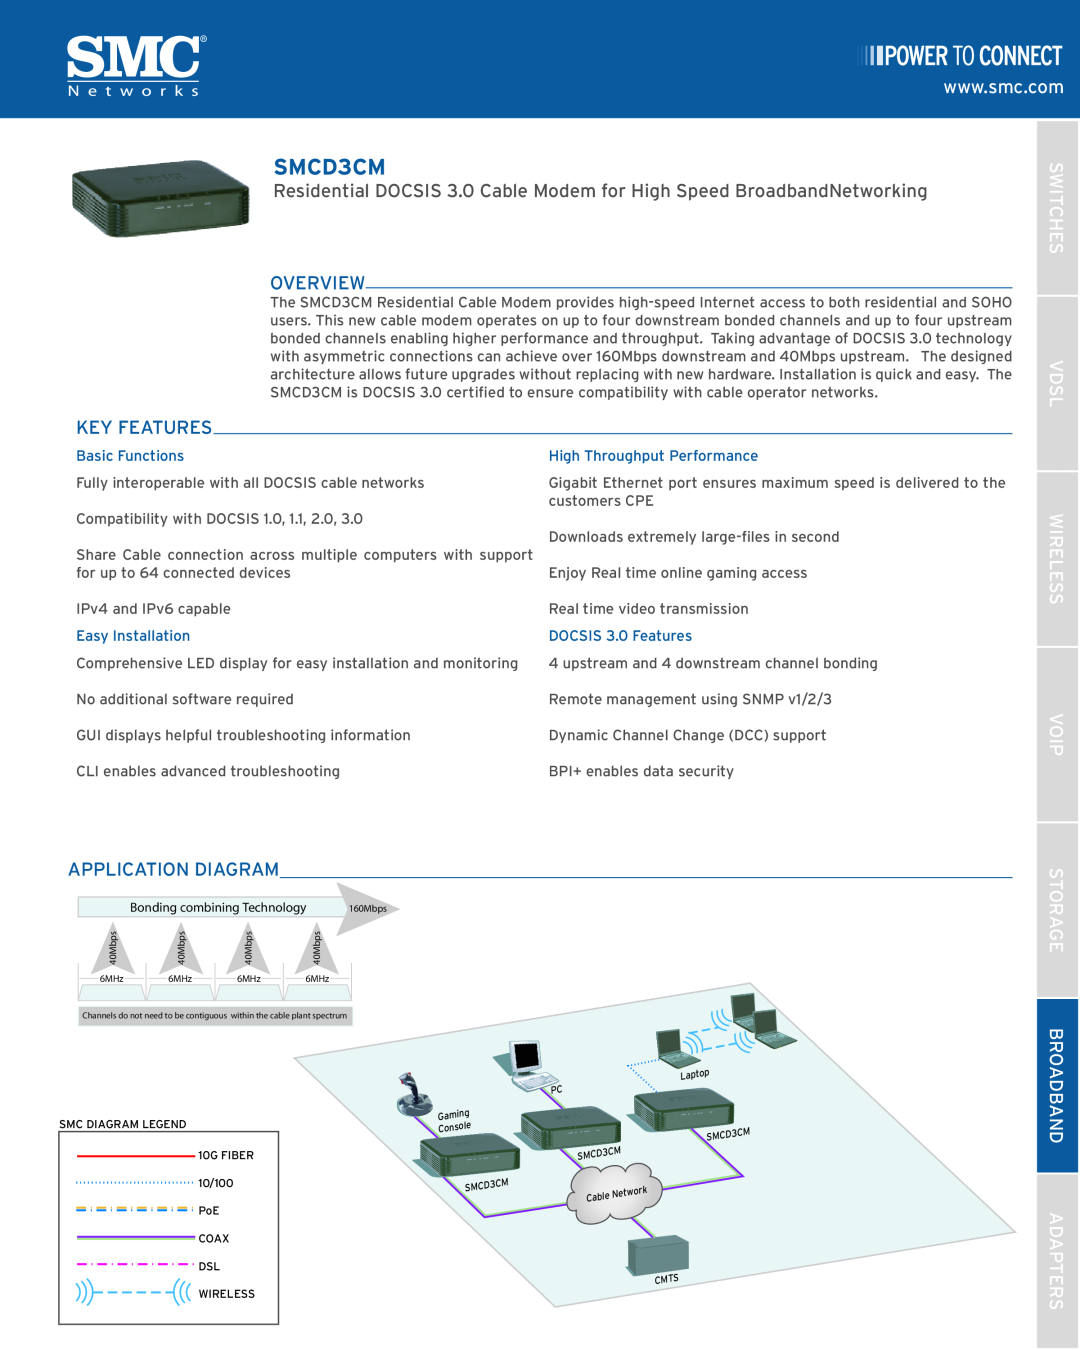 SMC Networks SMCD3CM manual Overview, Key Features, Application Diagram, Switches Vdsl Wireless Voip Storage 